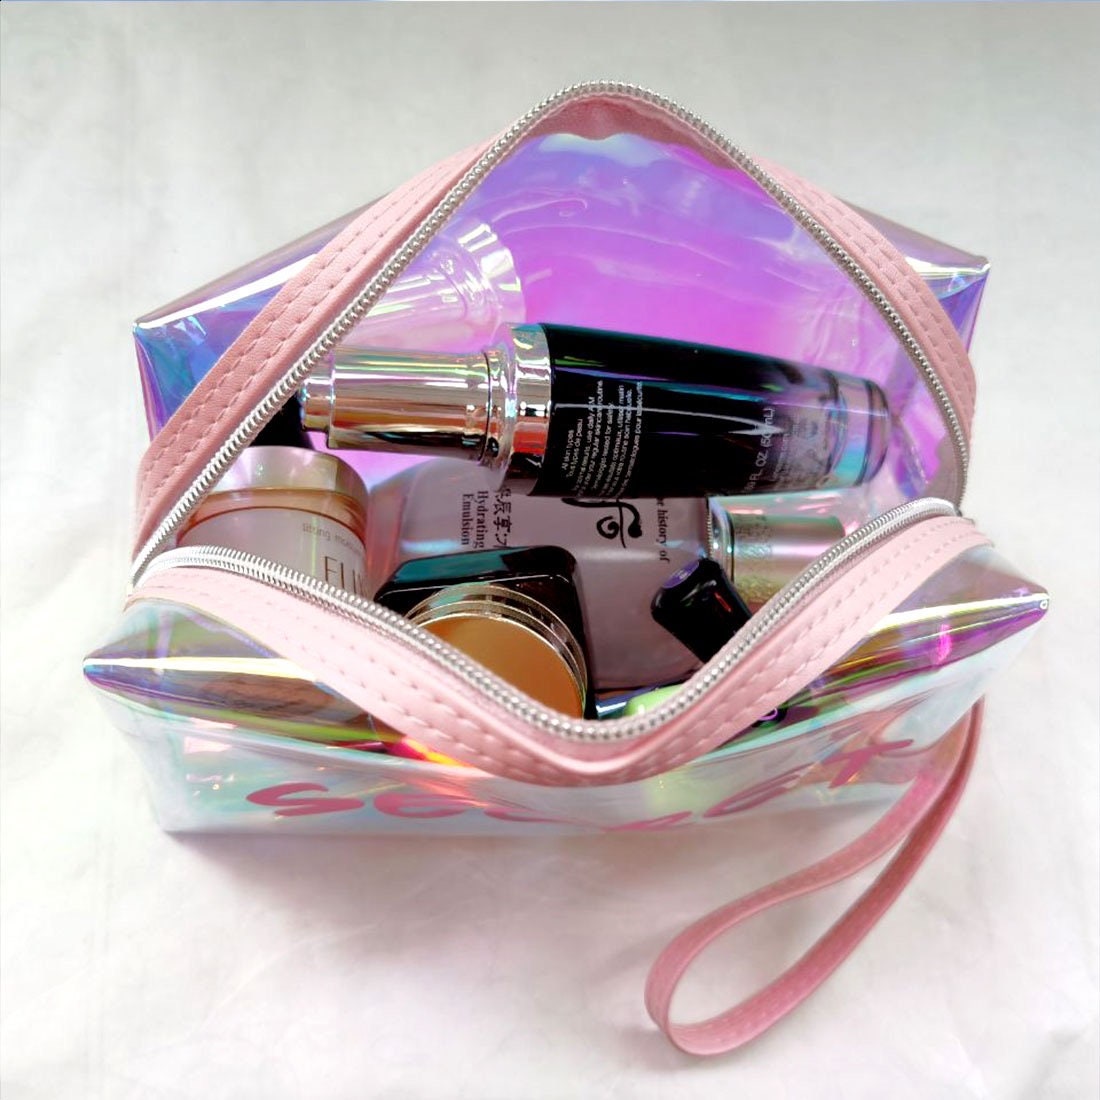 Iridescent Holo Jelly Cosmetic Makeup Bag Cosmetic & Toiletry Bags Pink Sweetheart